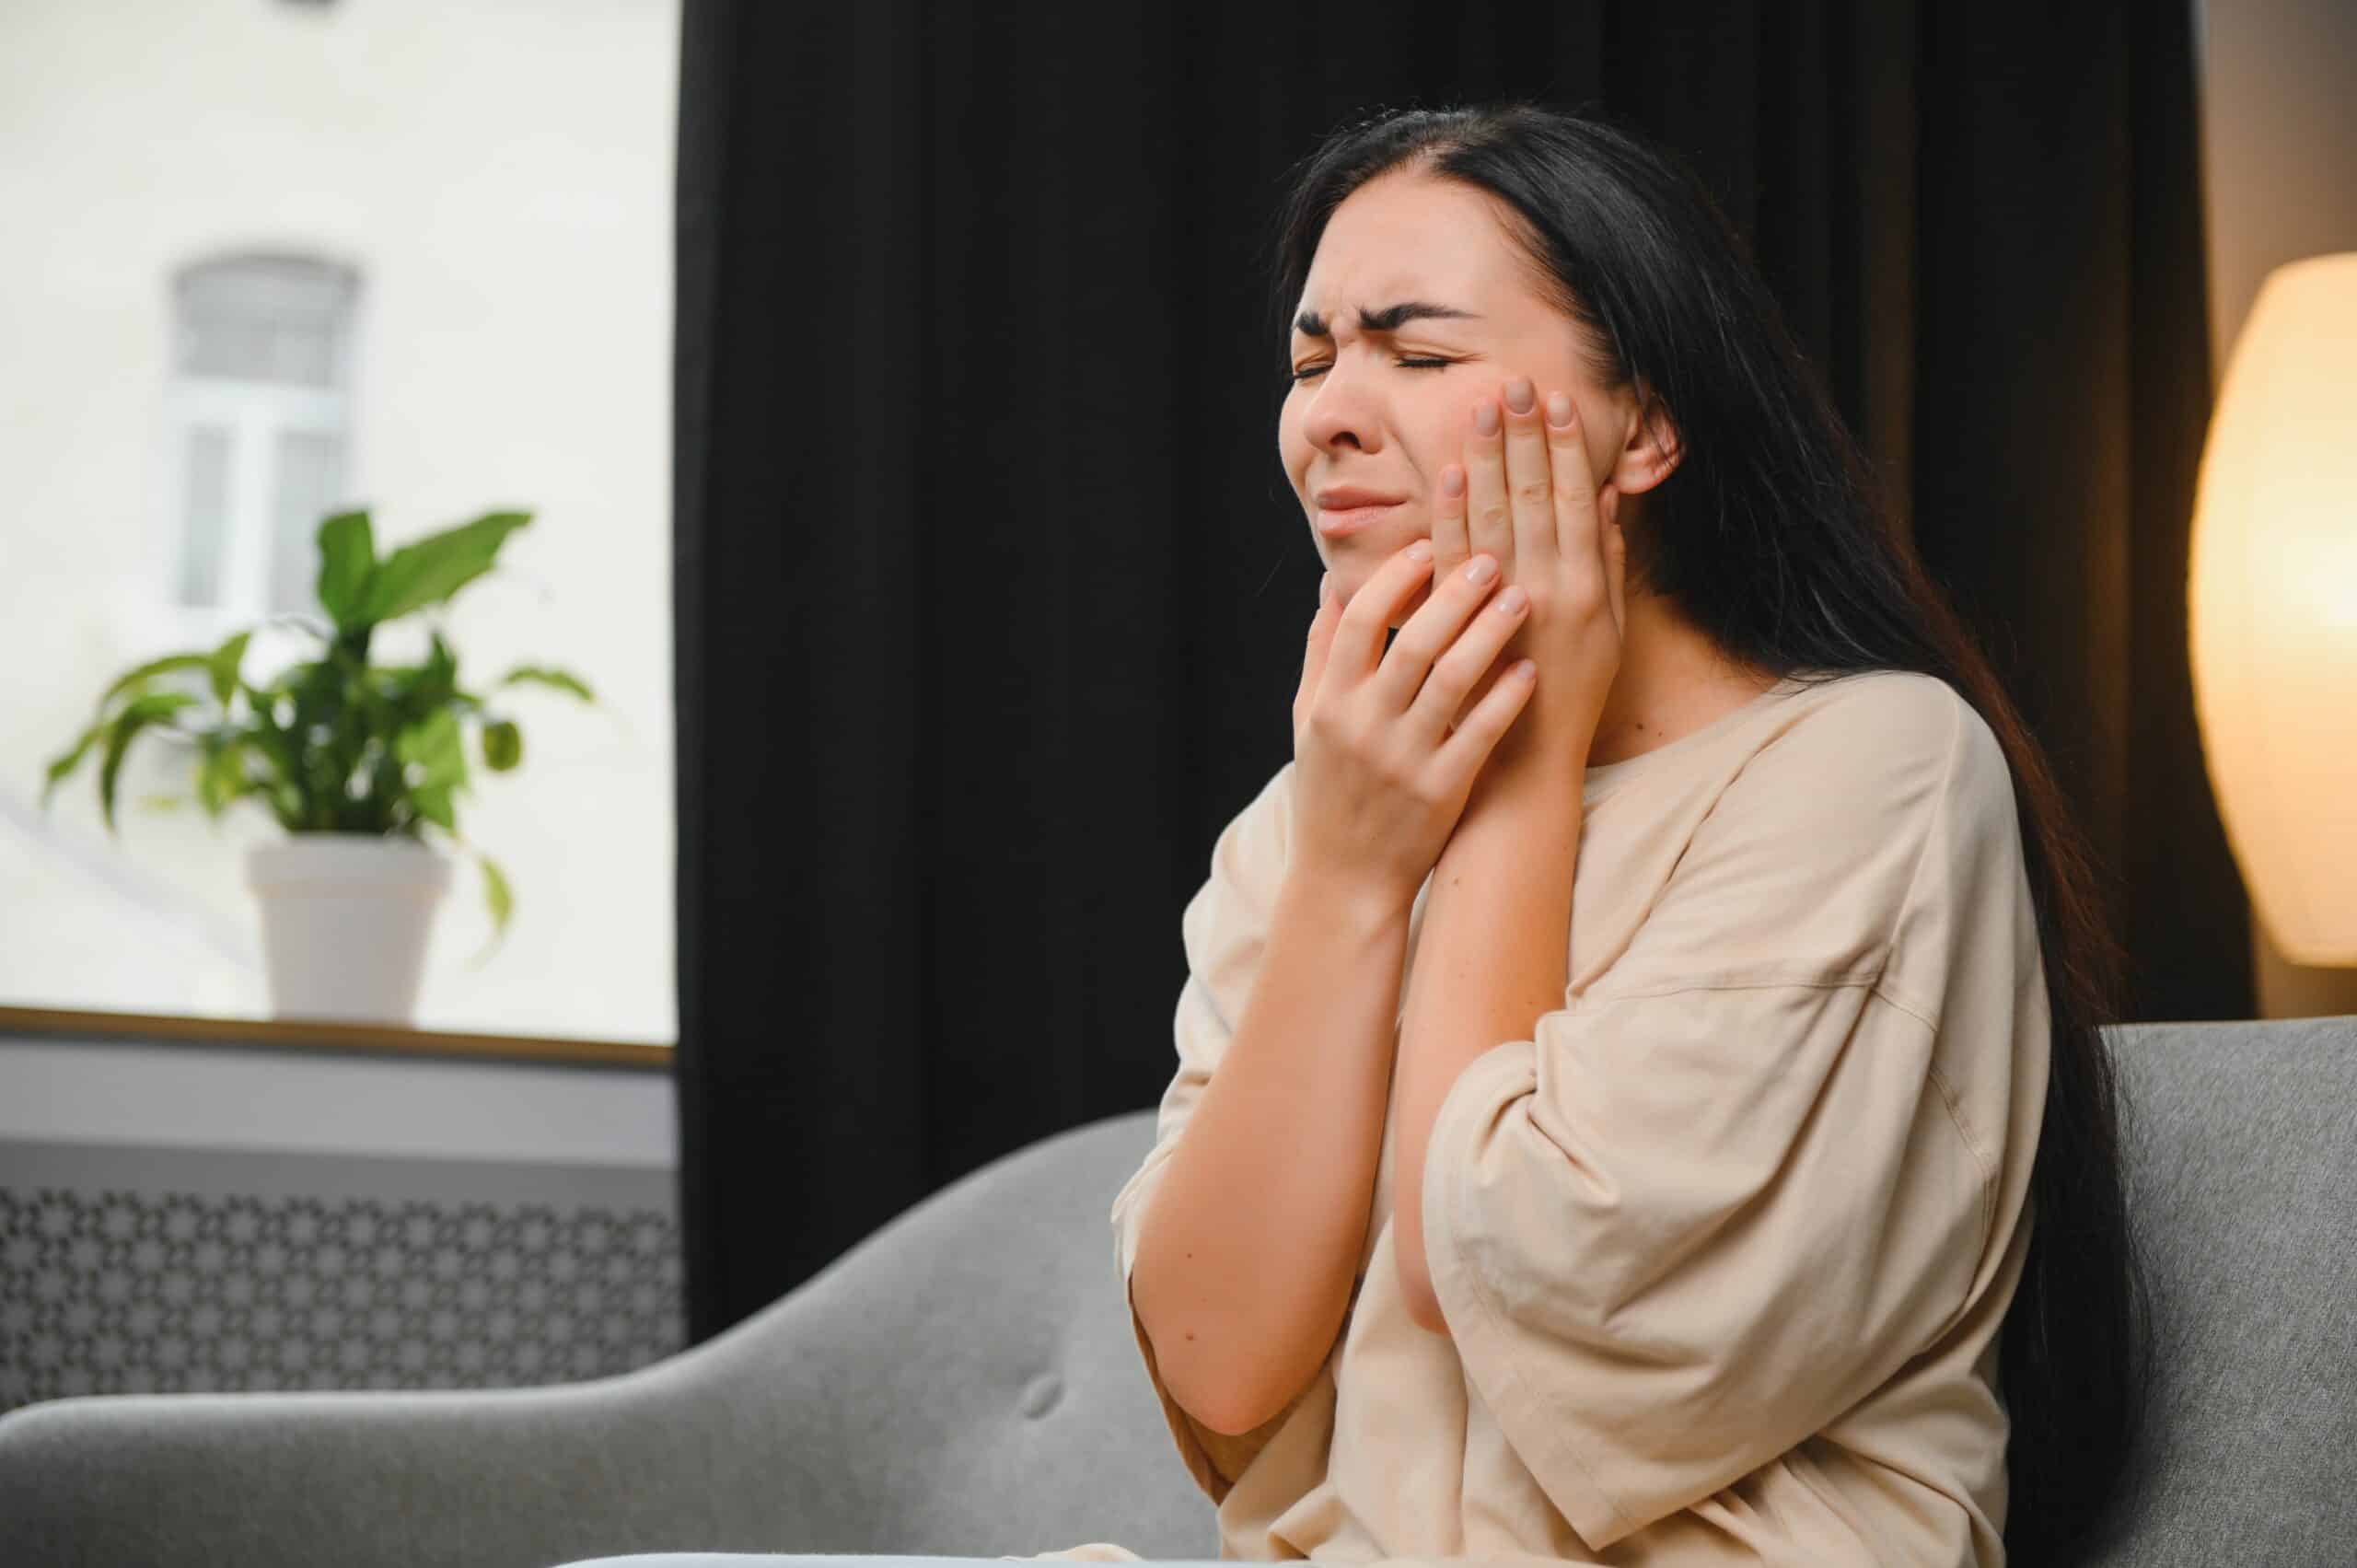 Signs You May Need a Root Canal